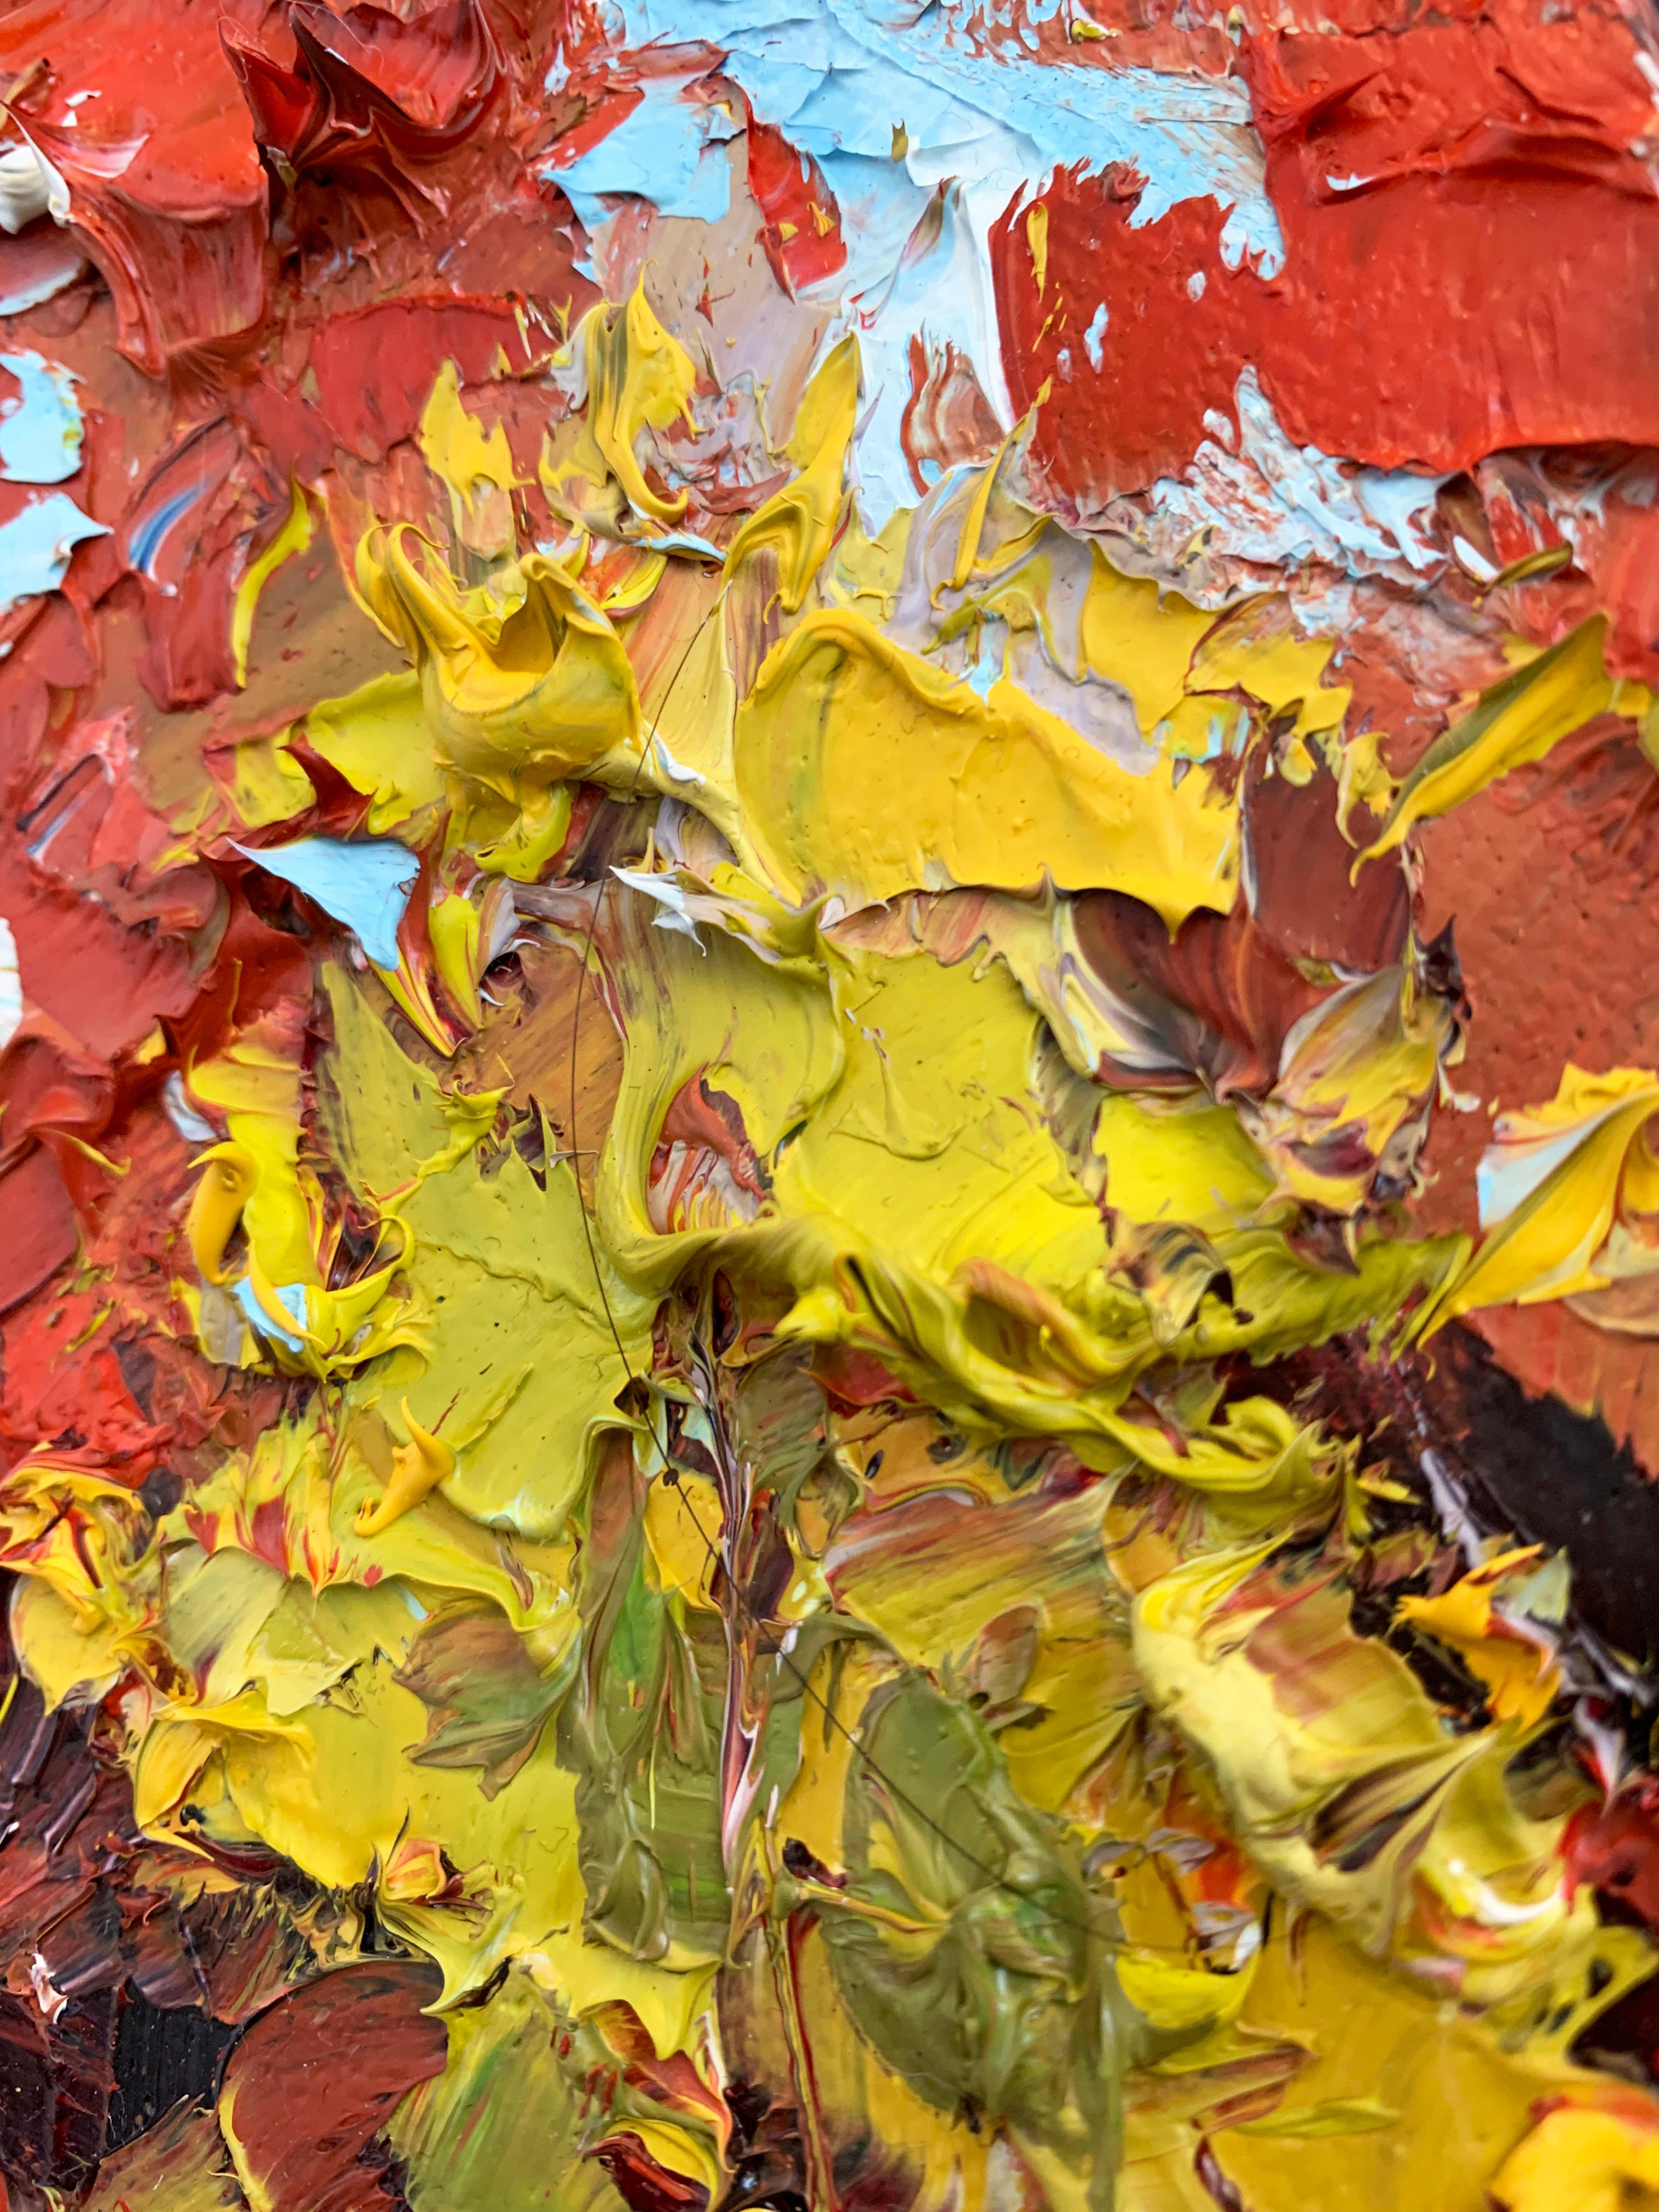 <p>Artist Comments<br />A birch tree forest in full autumn color. Bright red and yellow leaves dance in the breeze and cover the forest floor. Part of artist Lisa Elley's signature series of California landscapes using a 